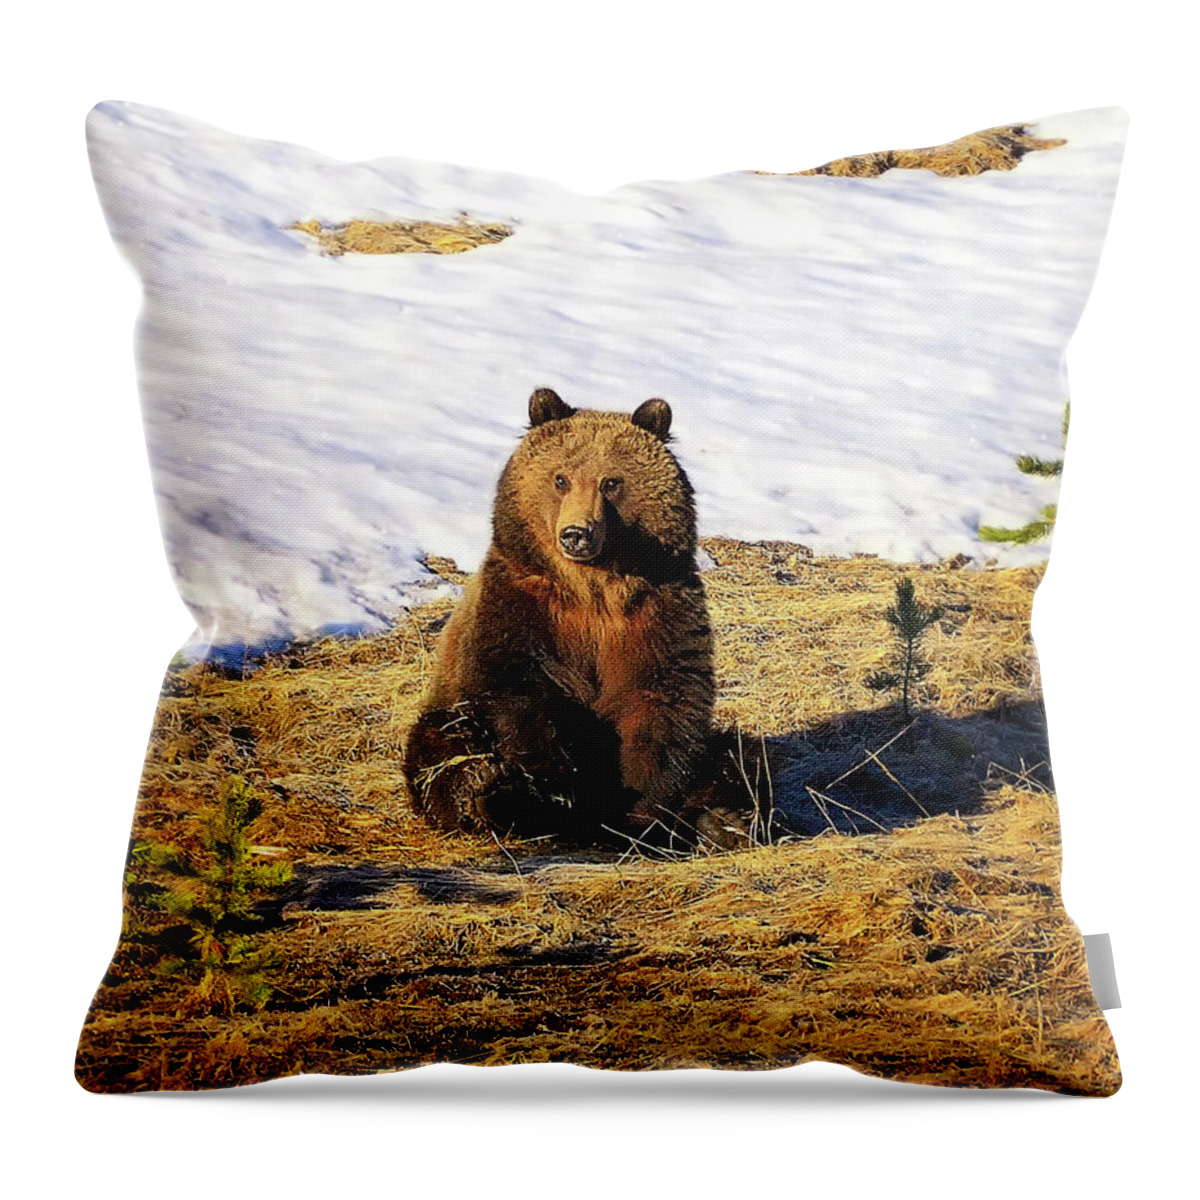 Grizzly Bear Throw Pillow featuring the photograph Sit Up And Take Notice by Greg Norrell